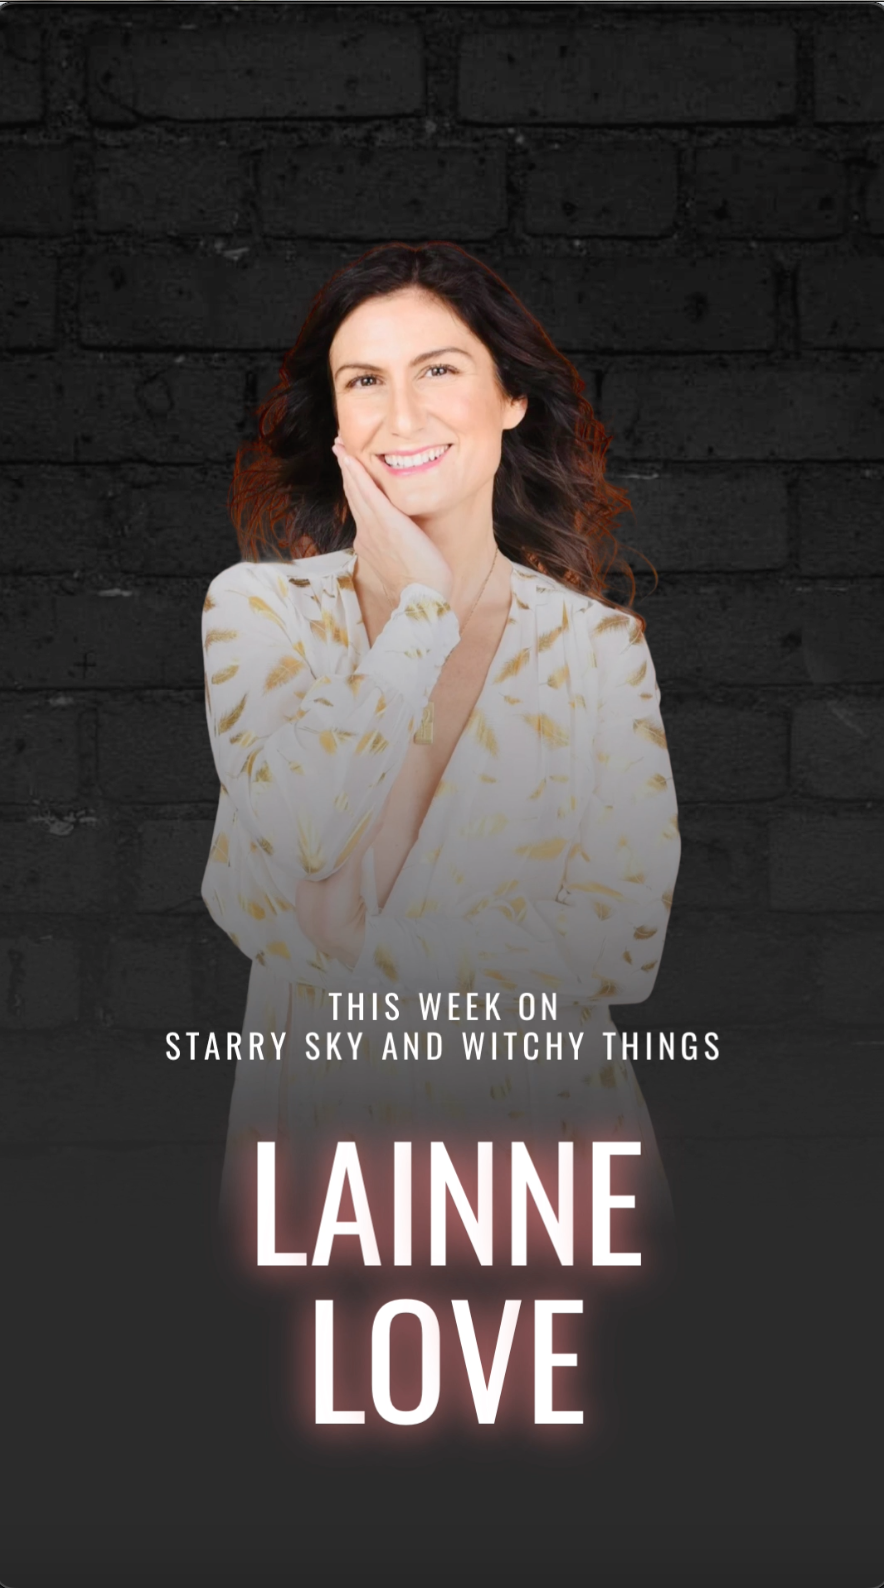 Promo Image for Lainne Love on the Starry Sky and Witchy Things podcast